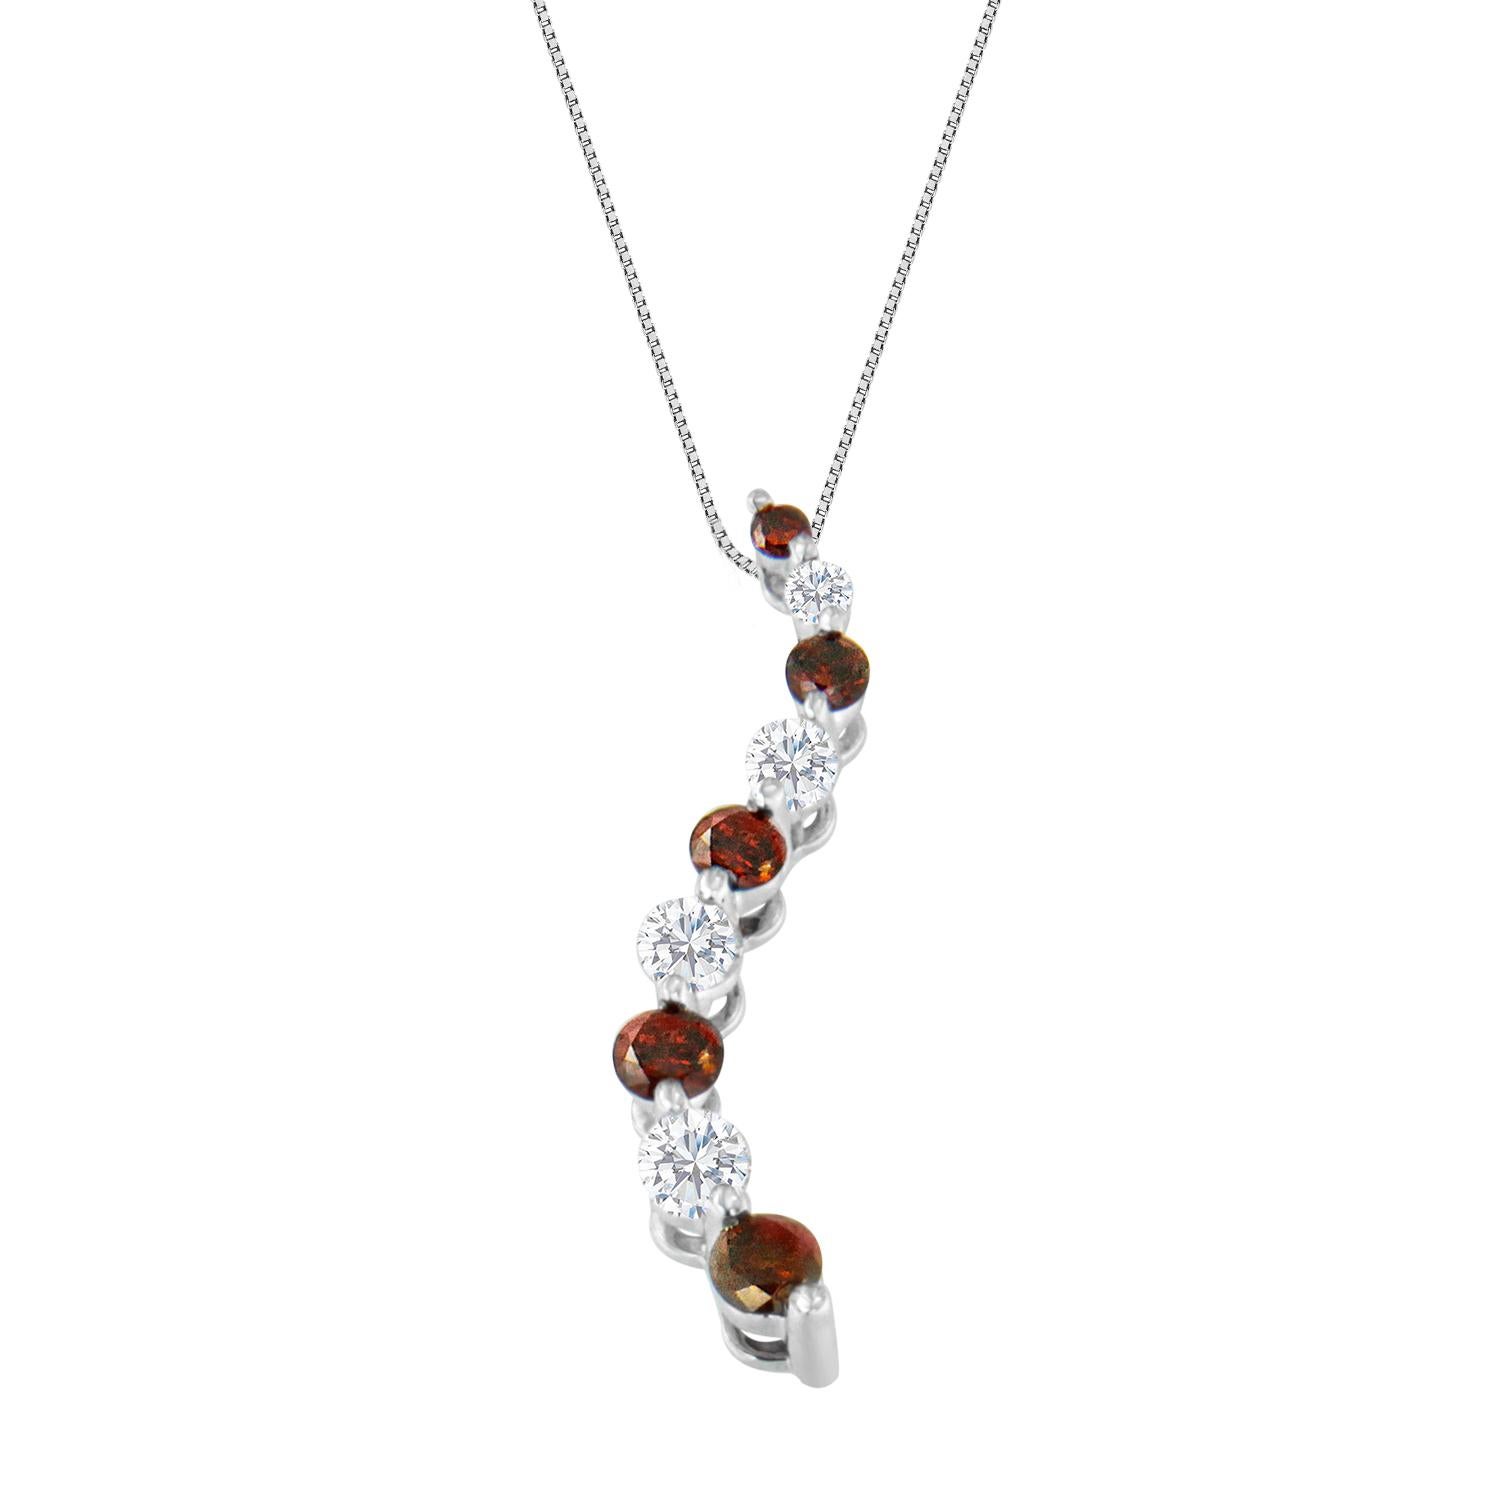 A cascading S curve of 14k white gold showcases round-cut red and white diamonds in this coveted pendant. Each stone is carefully prong set to catch the light for maximum sparkle. Ships with size 18 chain secured with a spring ring clasp. This